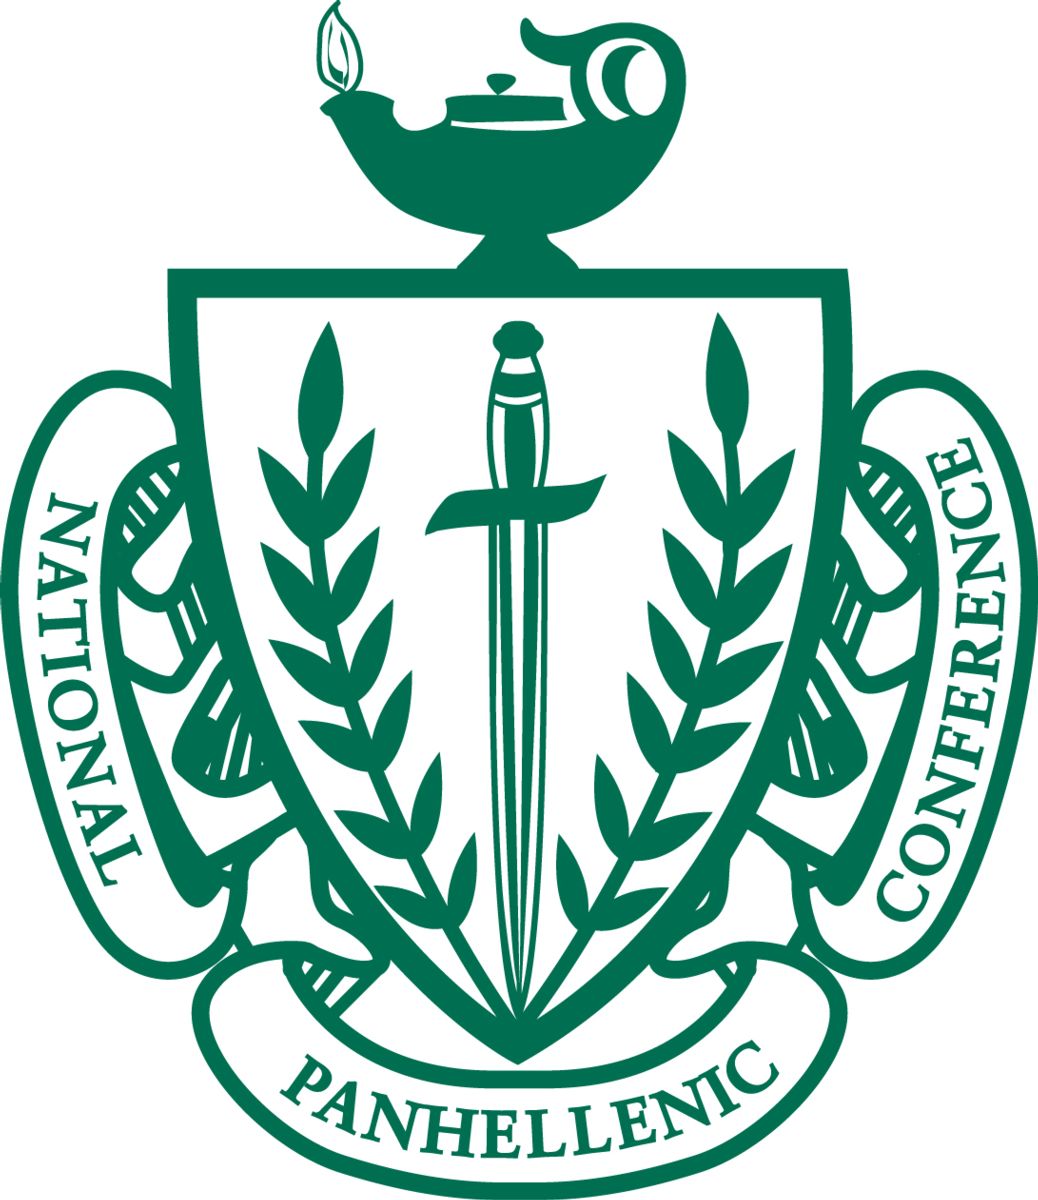 National Panhellenic Conference Logo